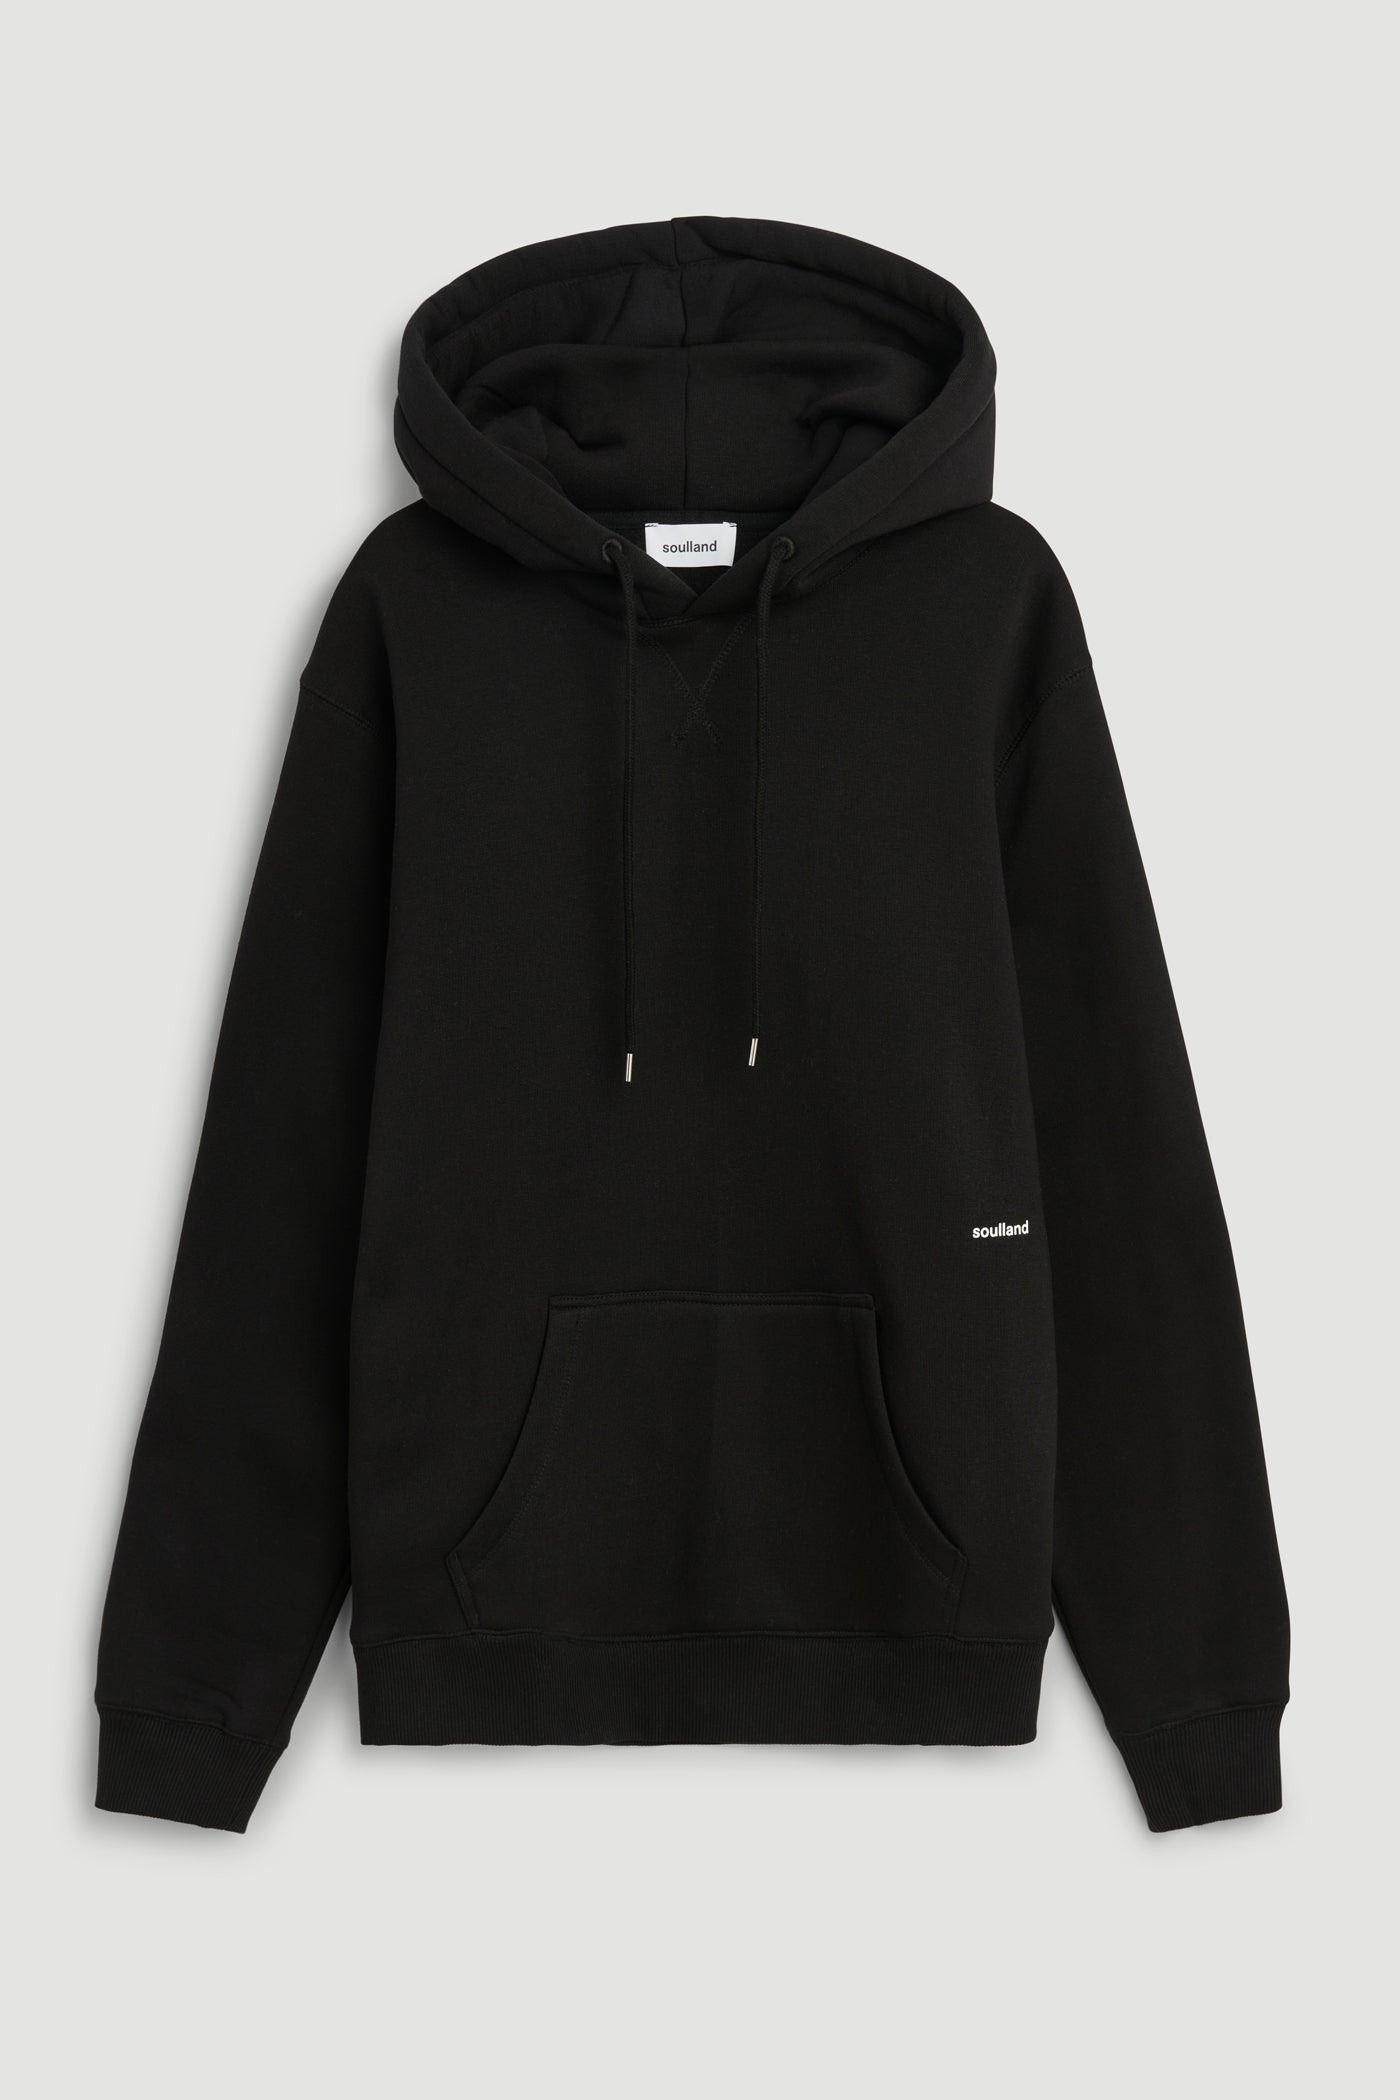 SOULLAND-OUTLET-SALE-Reed-Hoodie-Strick-ARCHIVE-COLLECTION-3.jpg